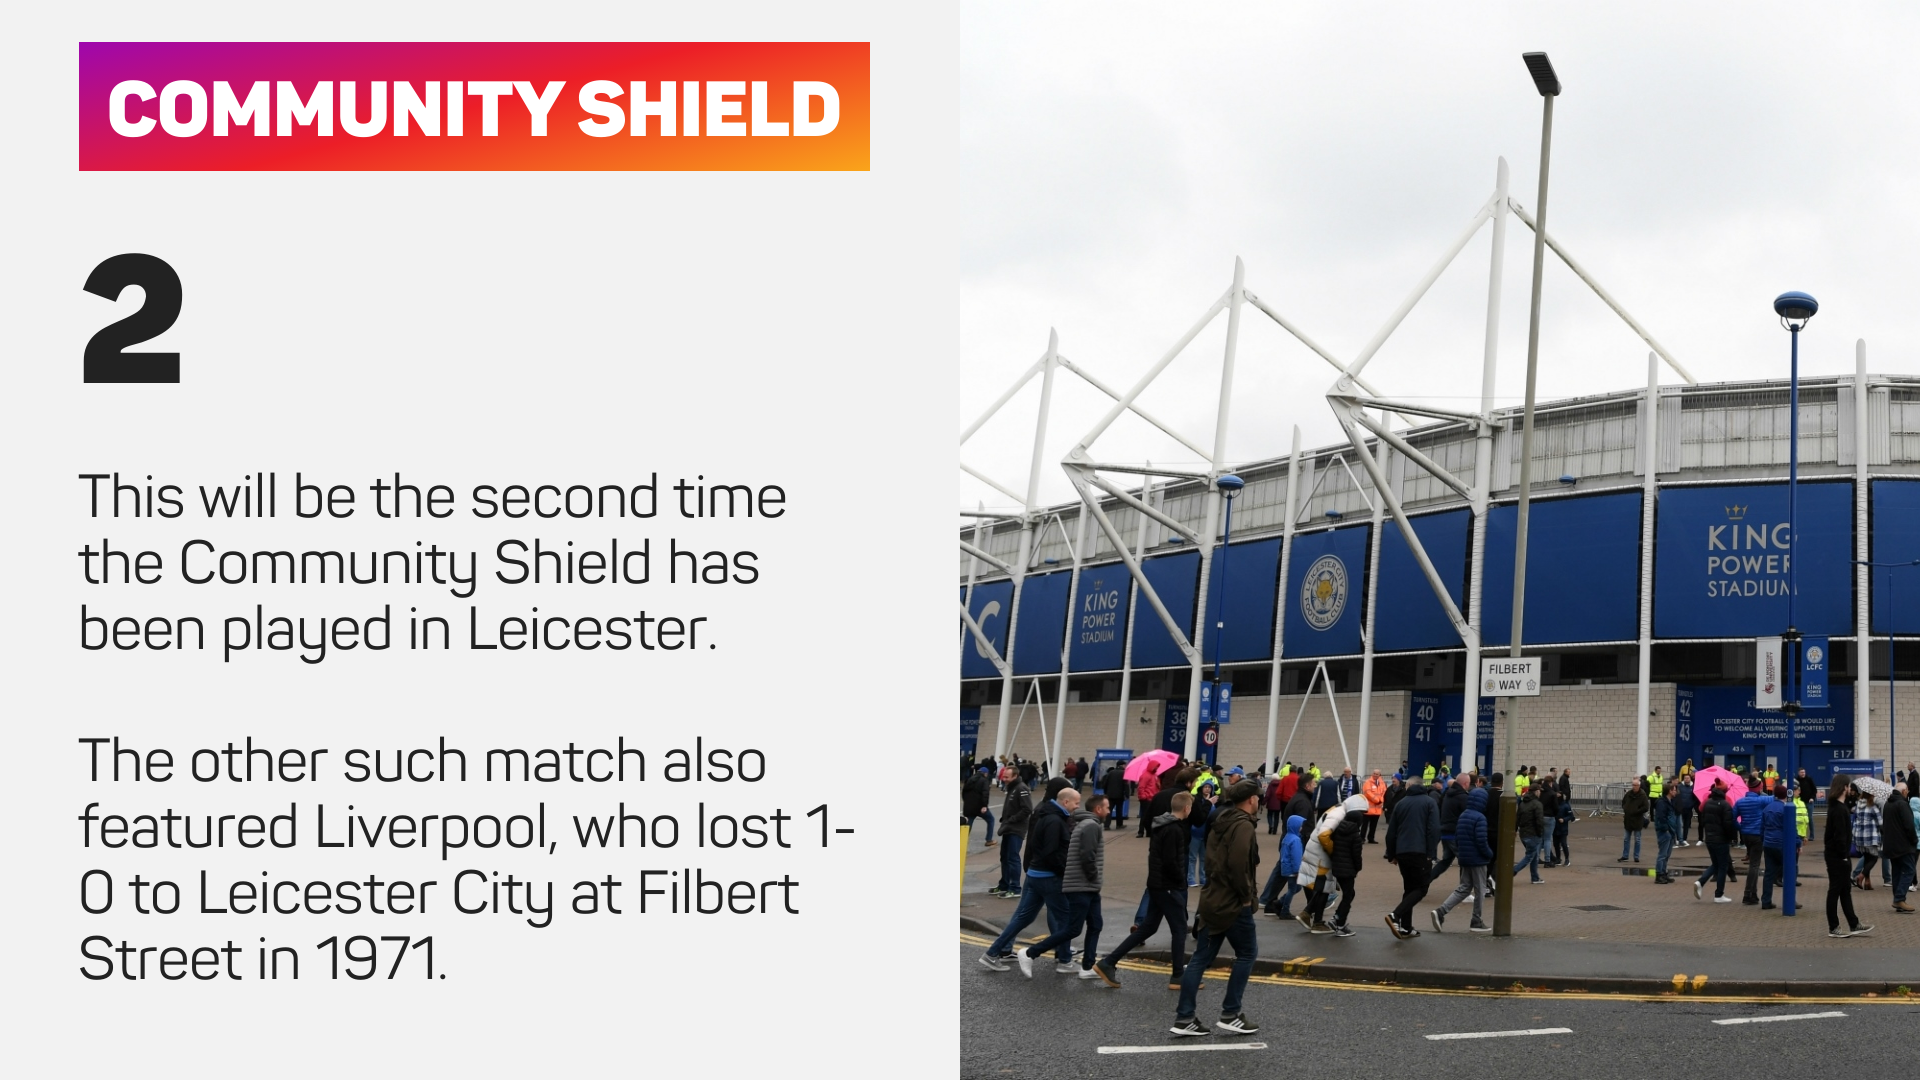 This will be the second time the Community Shield has been played in Leicester